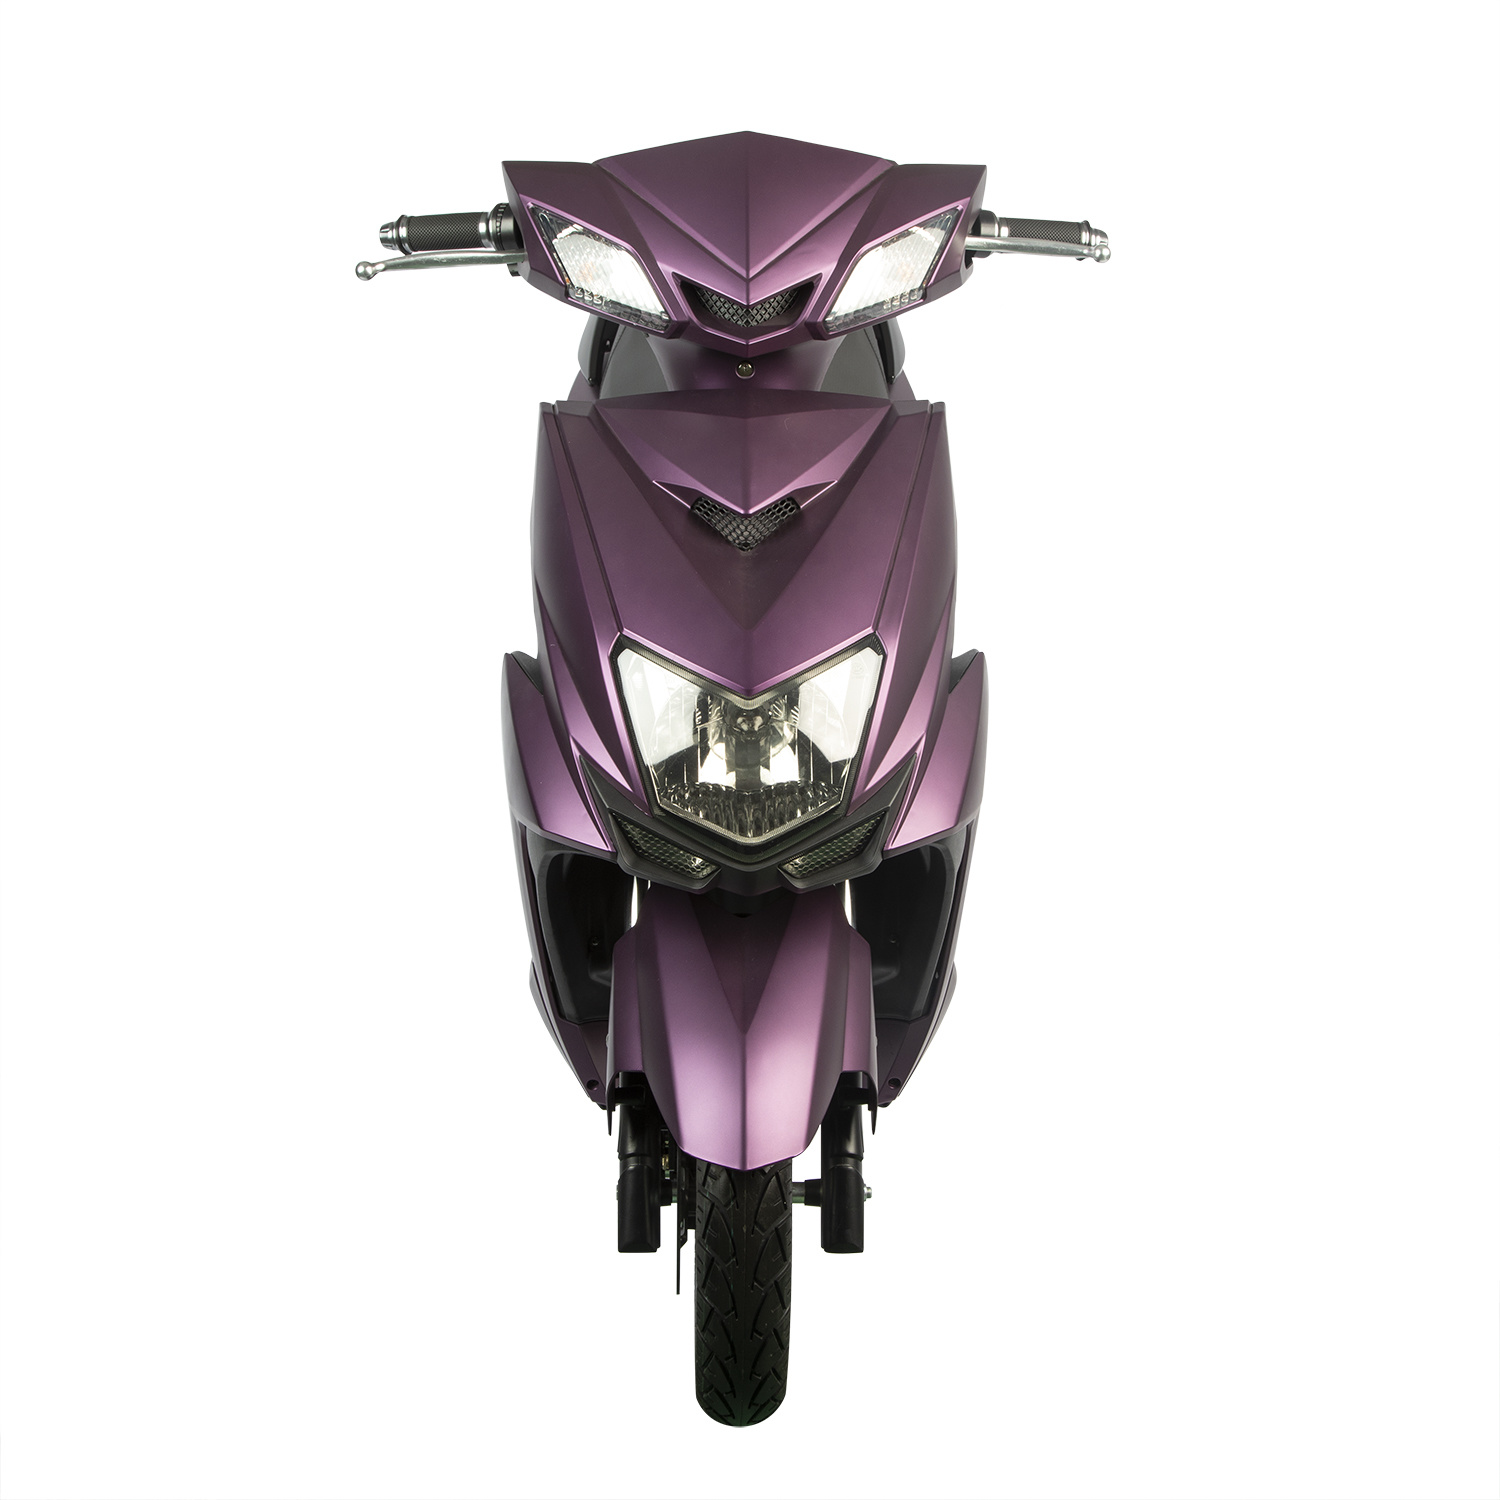 72V20ah Lithium Battery Electric Scooter Electric Motorcycle